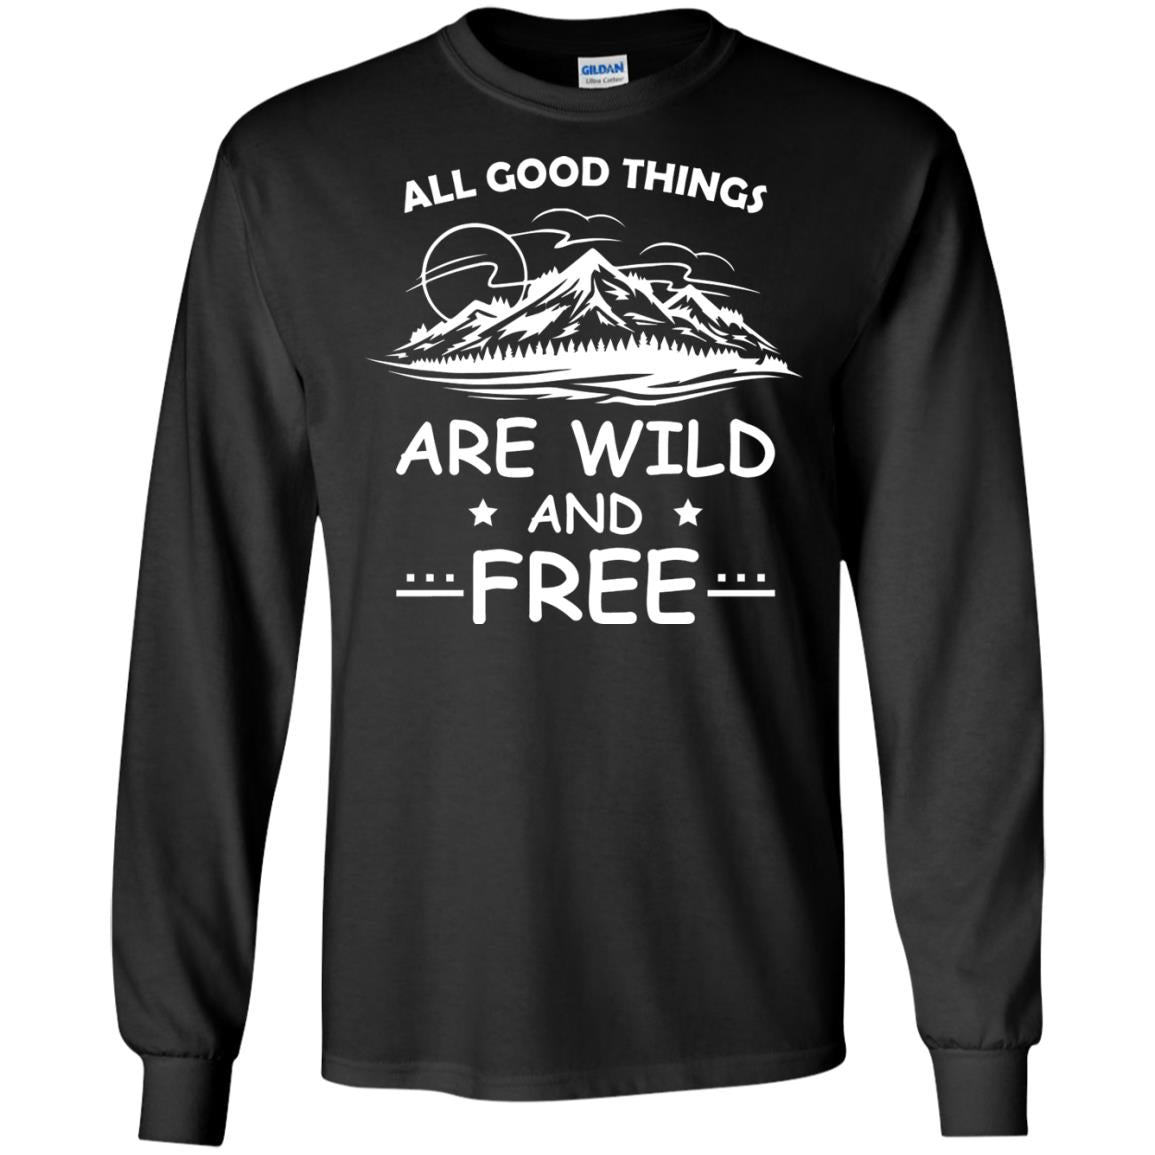 All Good Things Are Wild And Free Shirt For Hiking LoverG240 Gildan LS Ultra Cotton T-Shirt